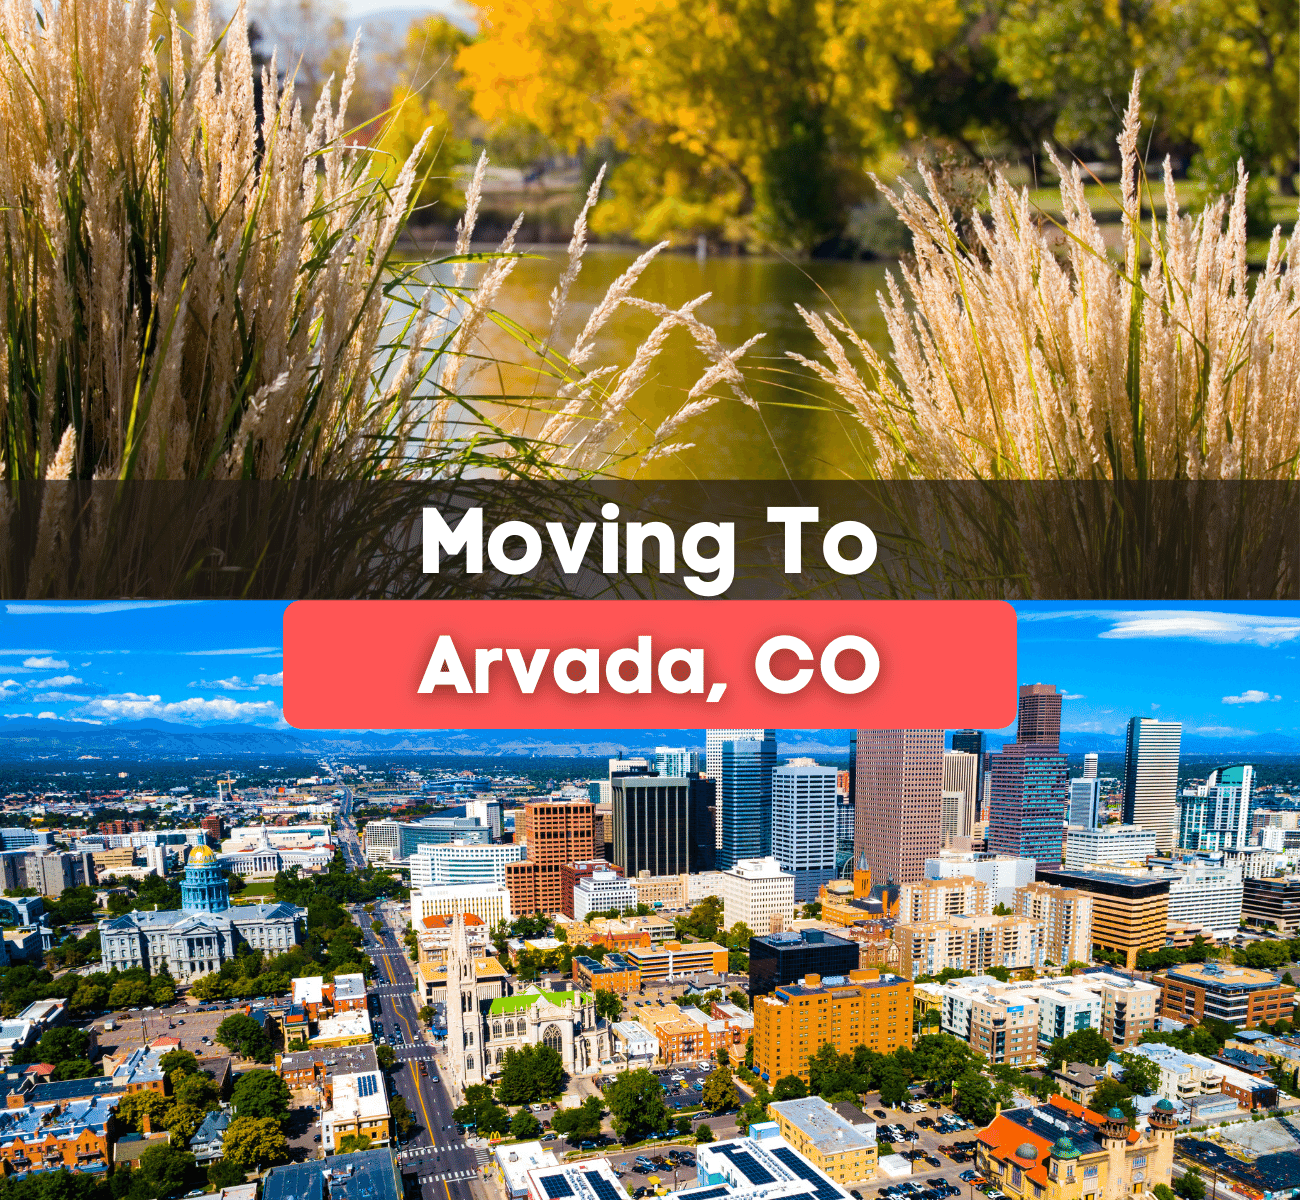 Moving to Arvada, CO - What is it like living in Arvada, Colorado?